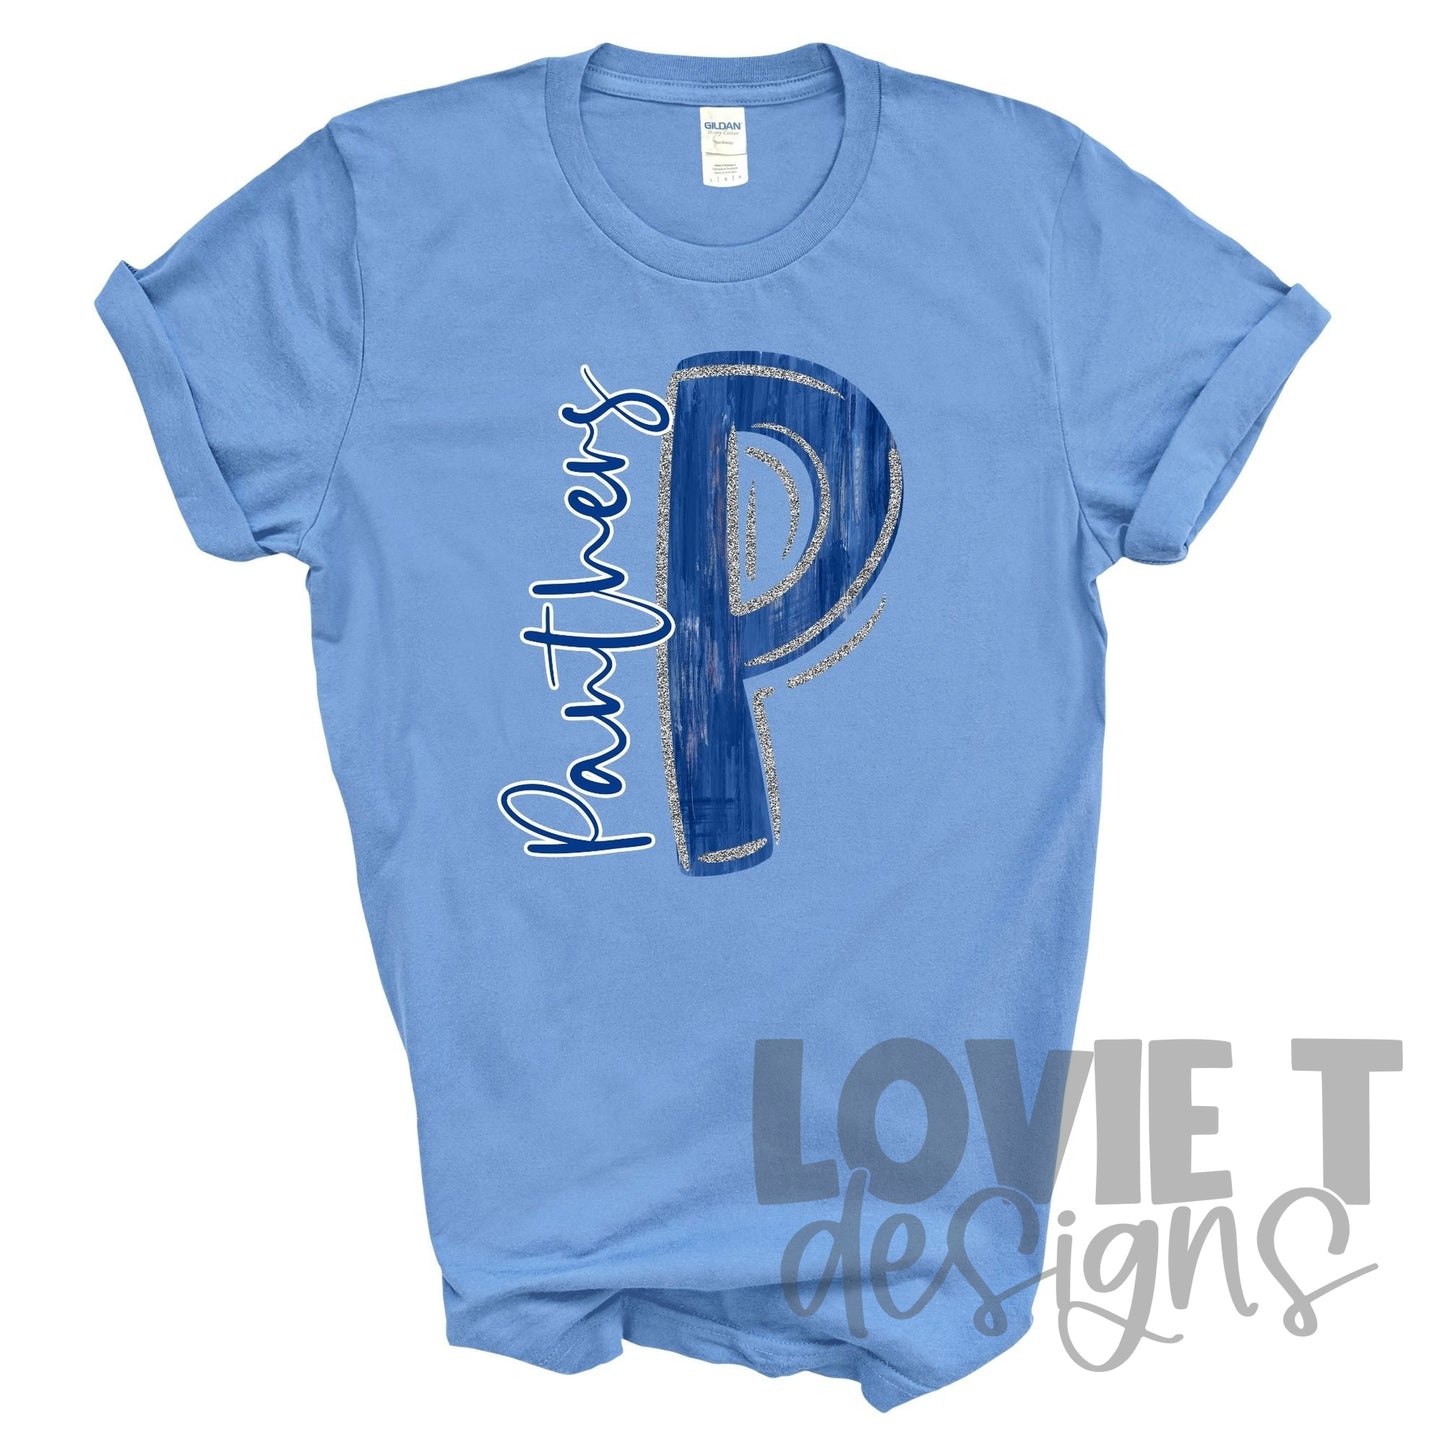 Blue and Silver P Panthers-Lovie T Designs